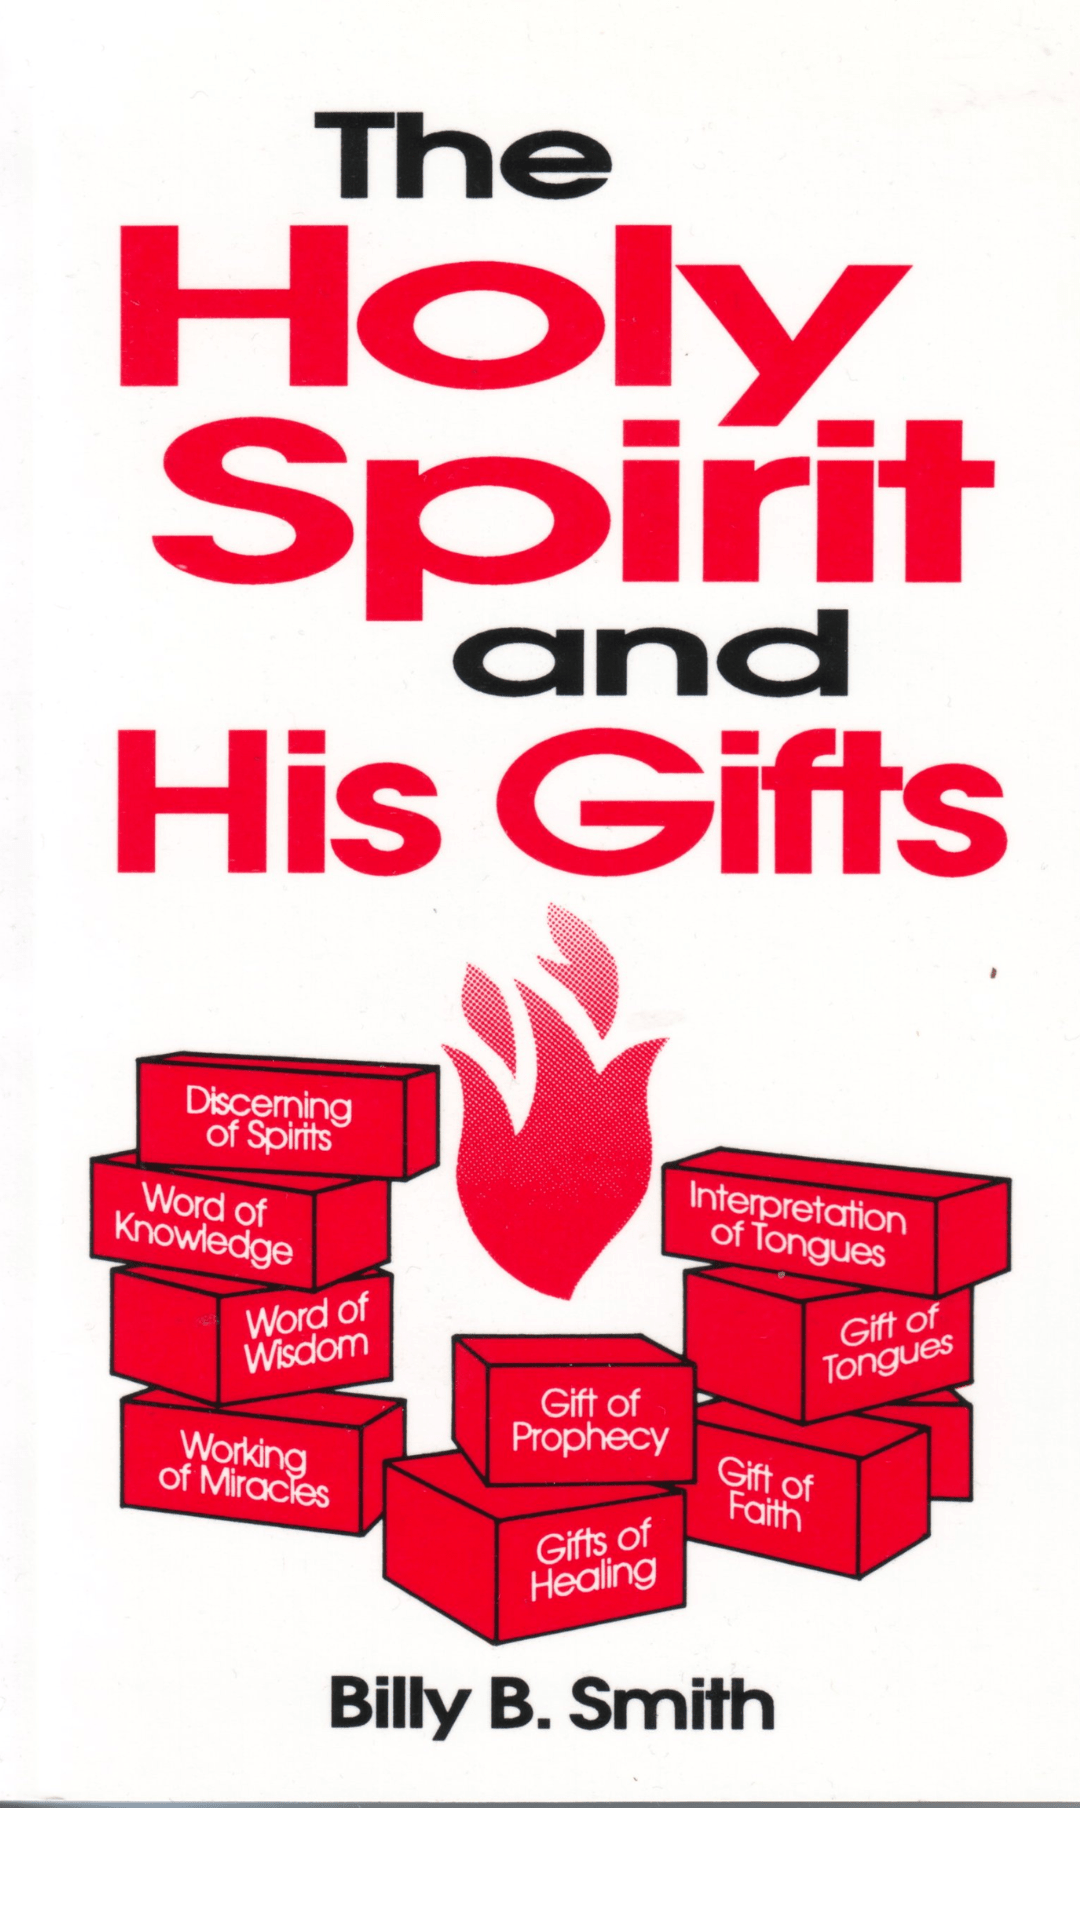 THE HOLY SPIRIT AND HIS GIFTS